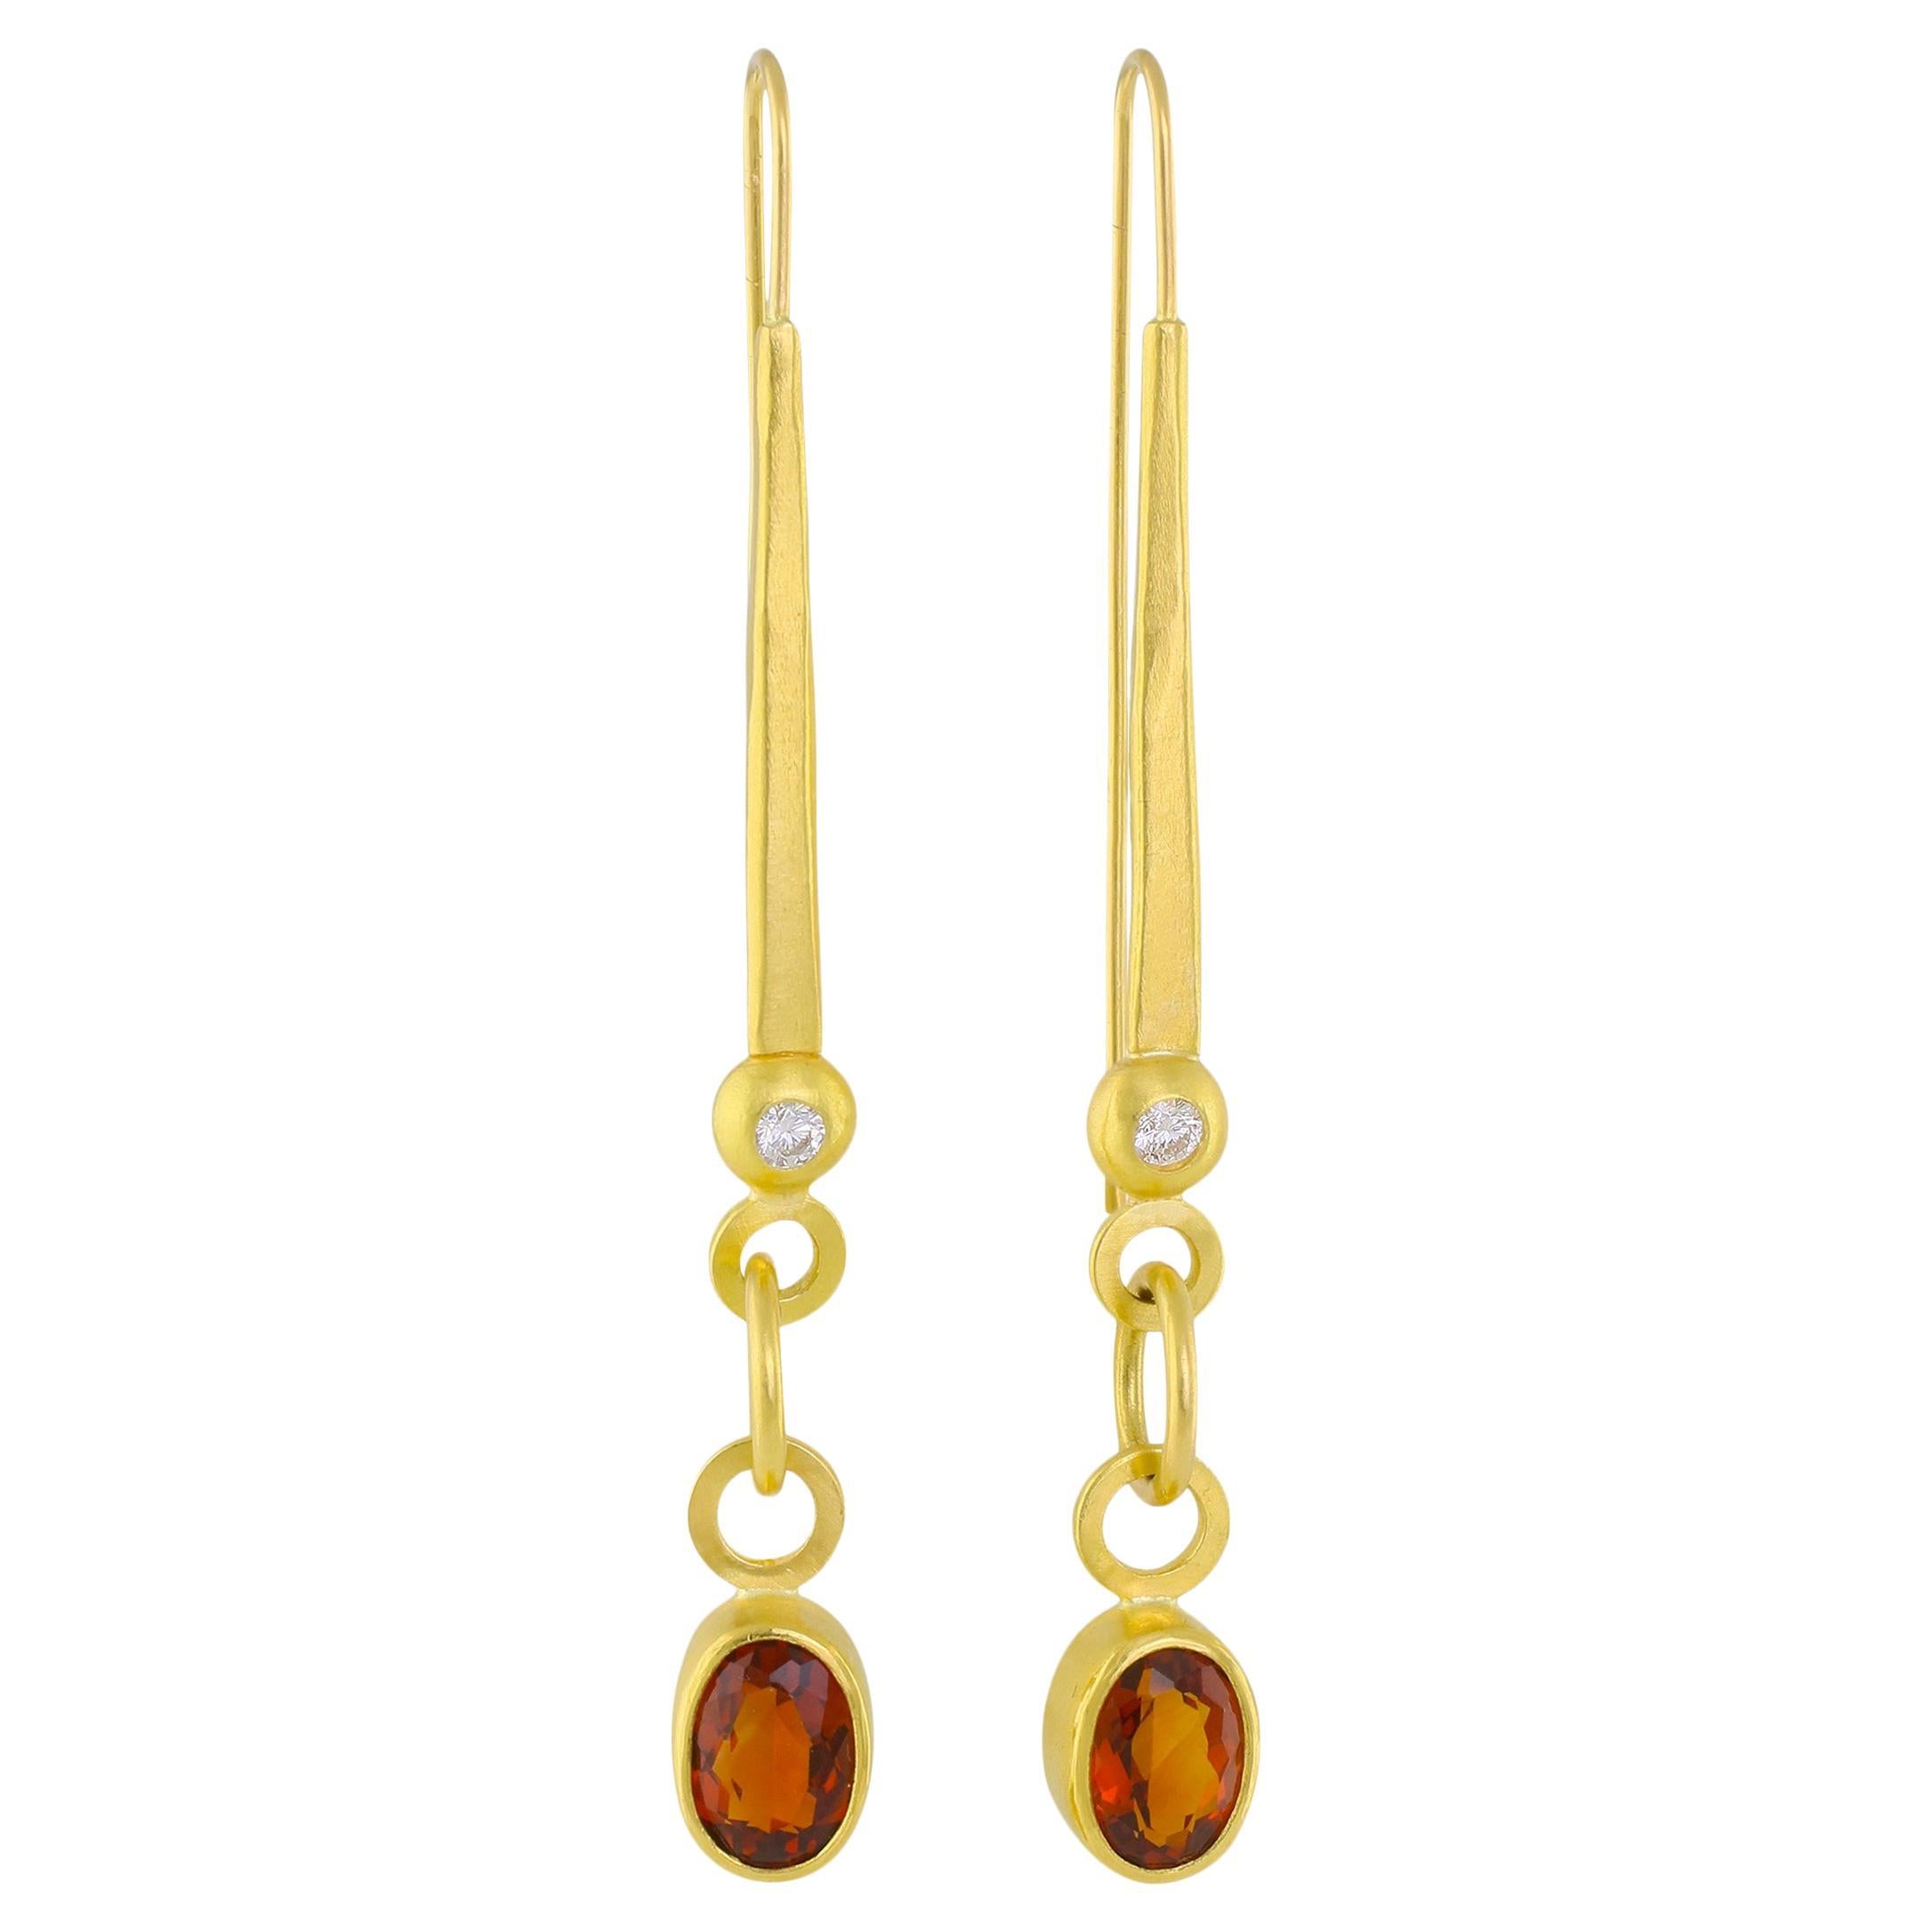 PHILIPPE SPENCER - 22K & 20K Gold with Diamond & Citrine Statement Earrings For Sale